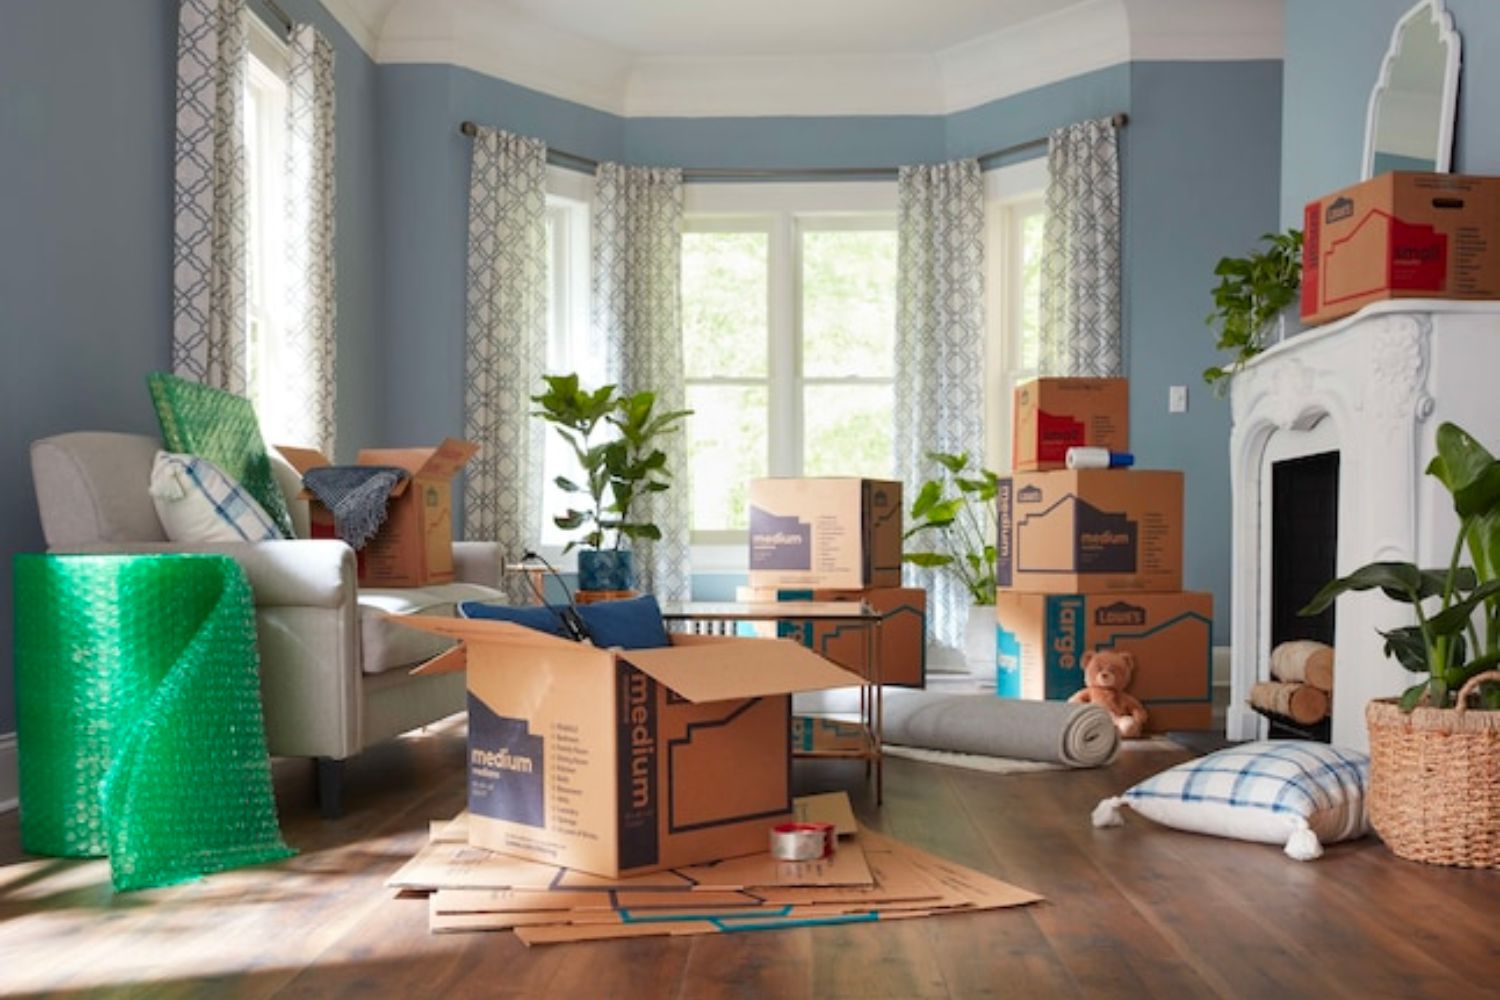 The Best Places to Buy Moving Boxes Option: Lowes